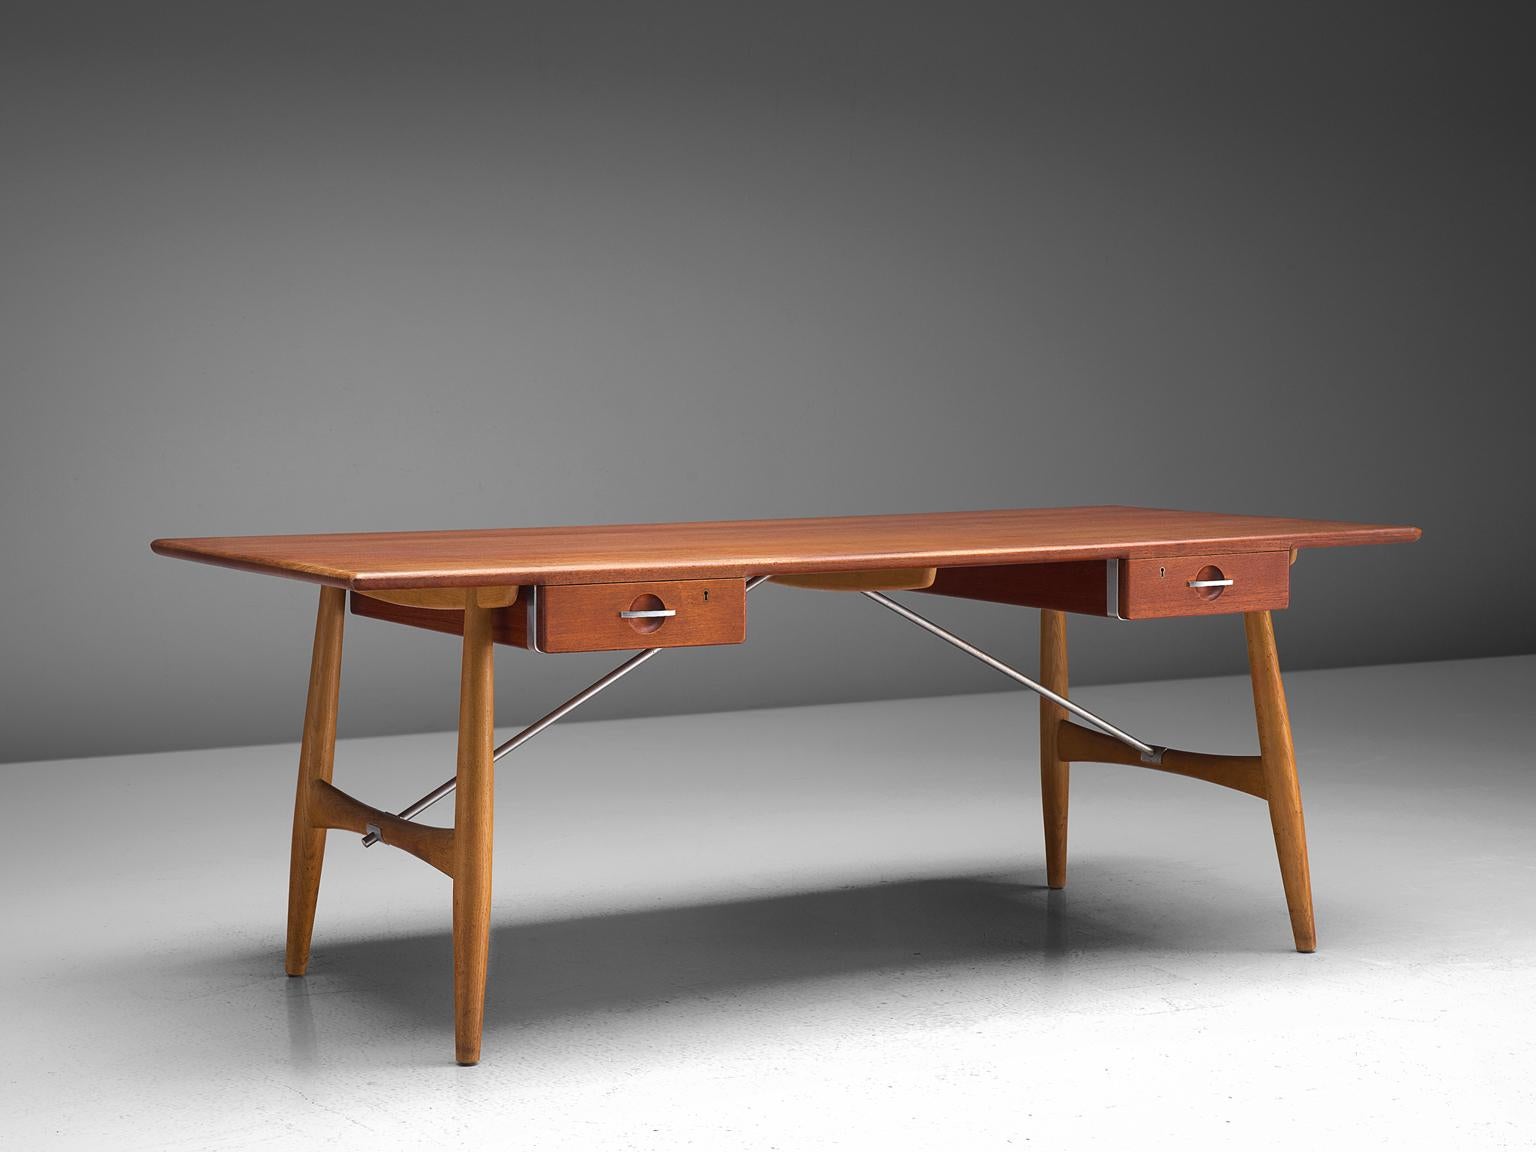 Hans J. Wegner for Johannes Hansen, desk JH571, teak, oak and metal, Denmark, 1953

Wegner designed the JH571 desk in 1953. It features a rectangular tabletop, beneath hanging two drawers with keywhole on each side. Two paired legs on the short side